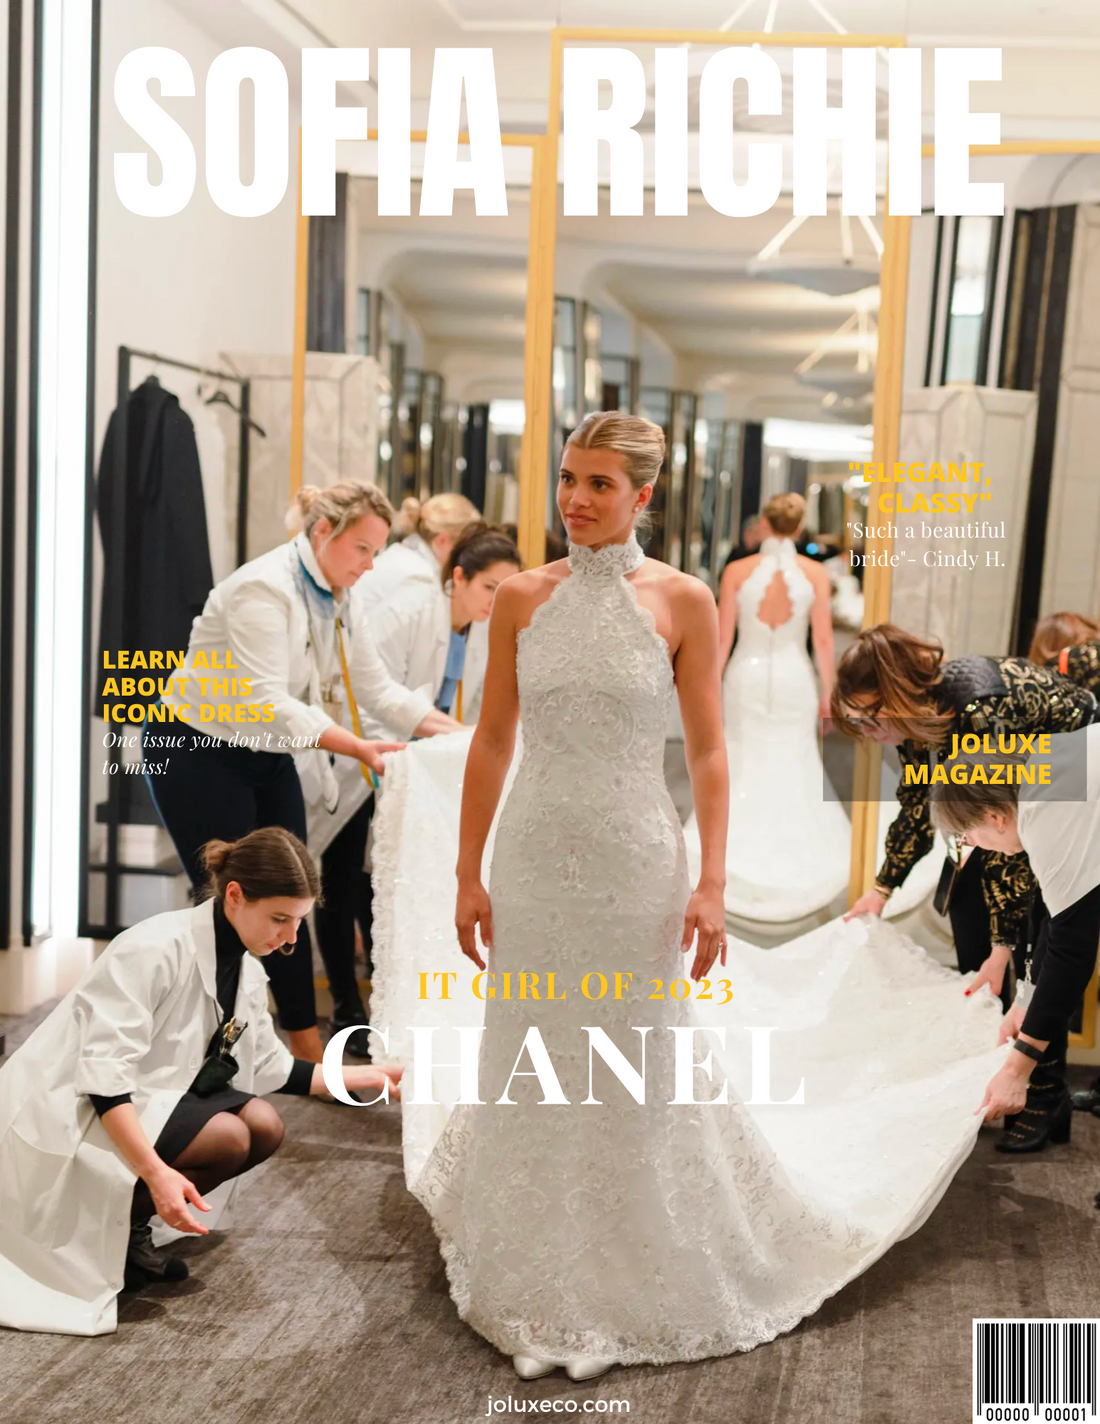 Sofia Richie "It Girl of 2023", Ties the Knot!